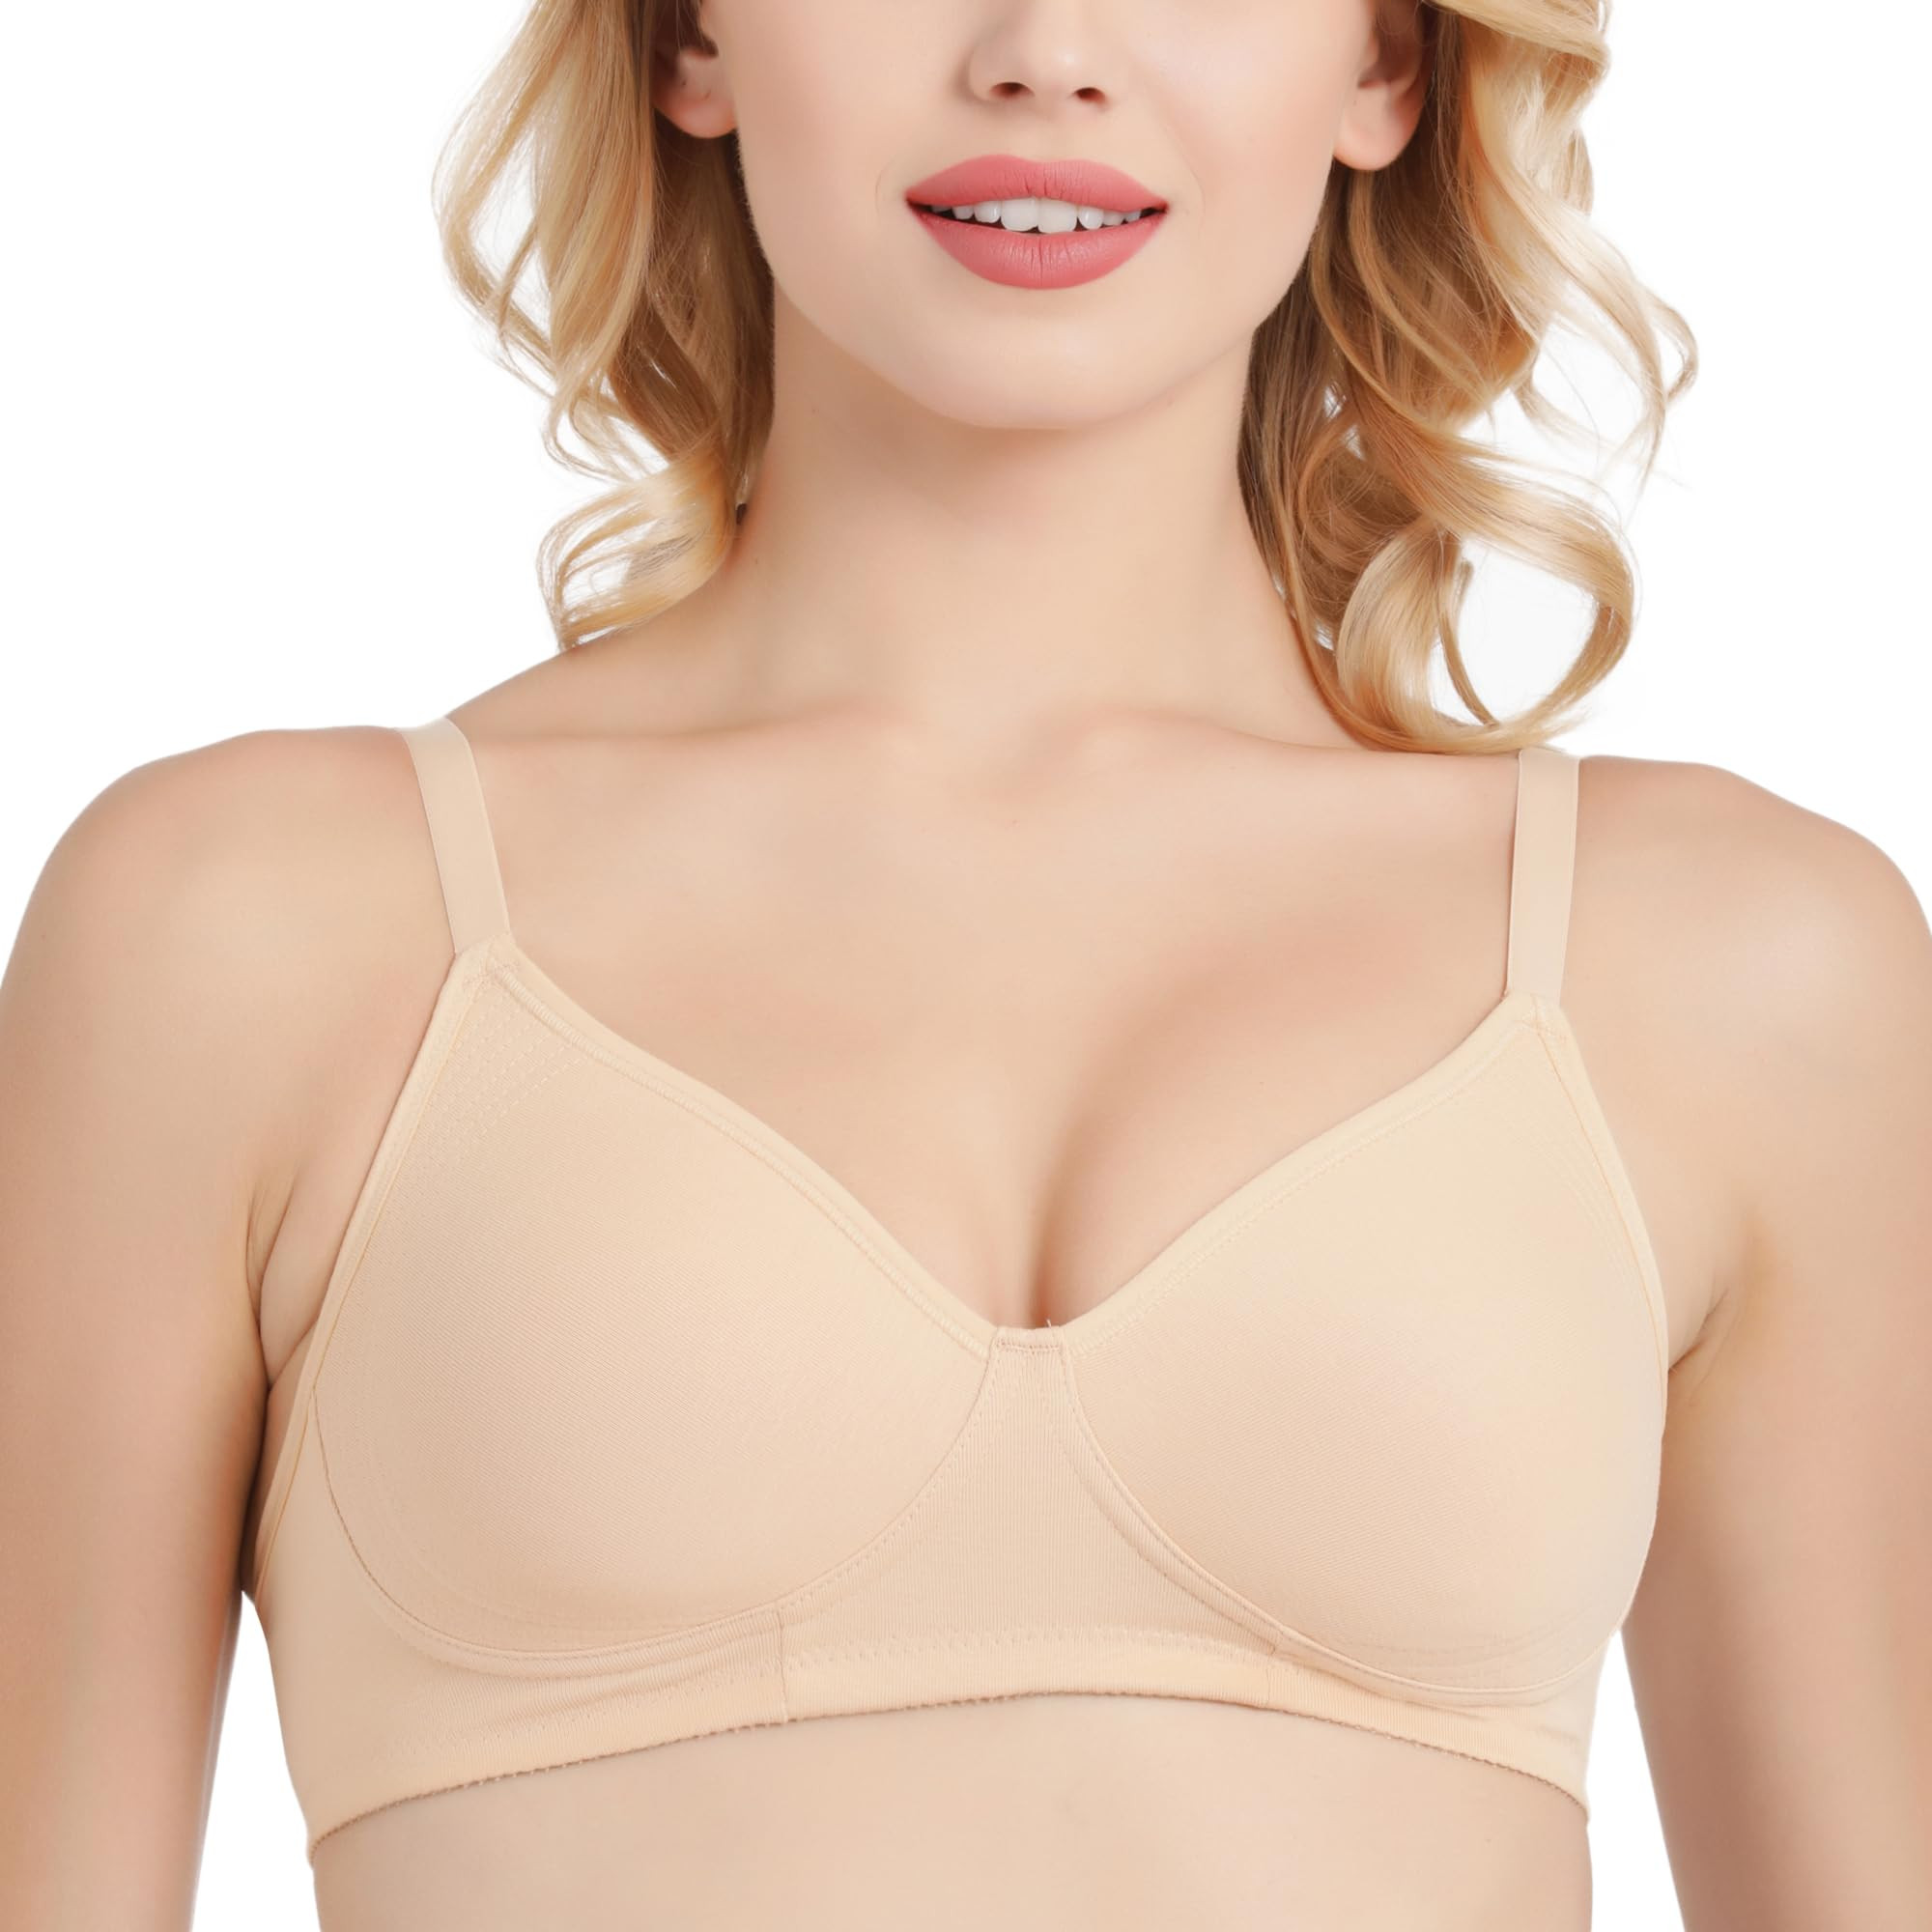 Enamor AB75 M-Frame Jiggle Control Full Support Supima Cotton Bra -  Non-Padded, Wirefree & Full